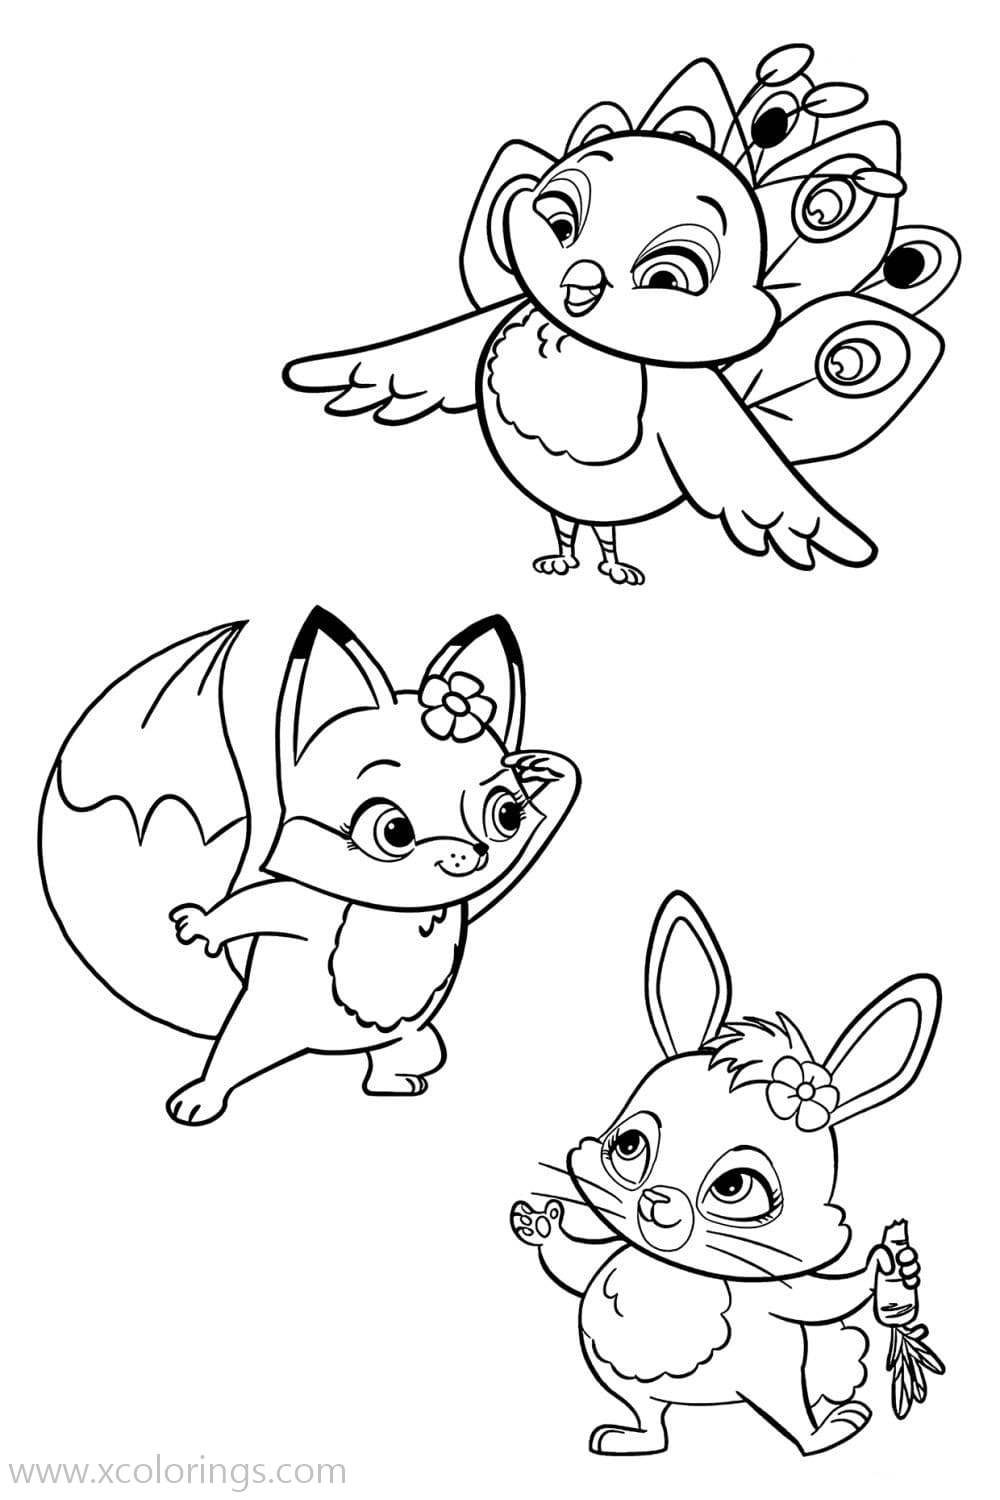 Free Enchantimals Coloring Pages Peacock Bunny and Fox printable